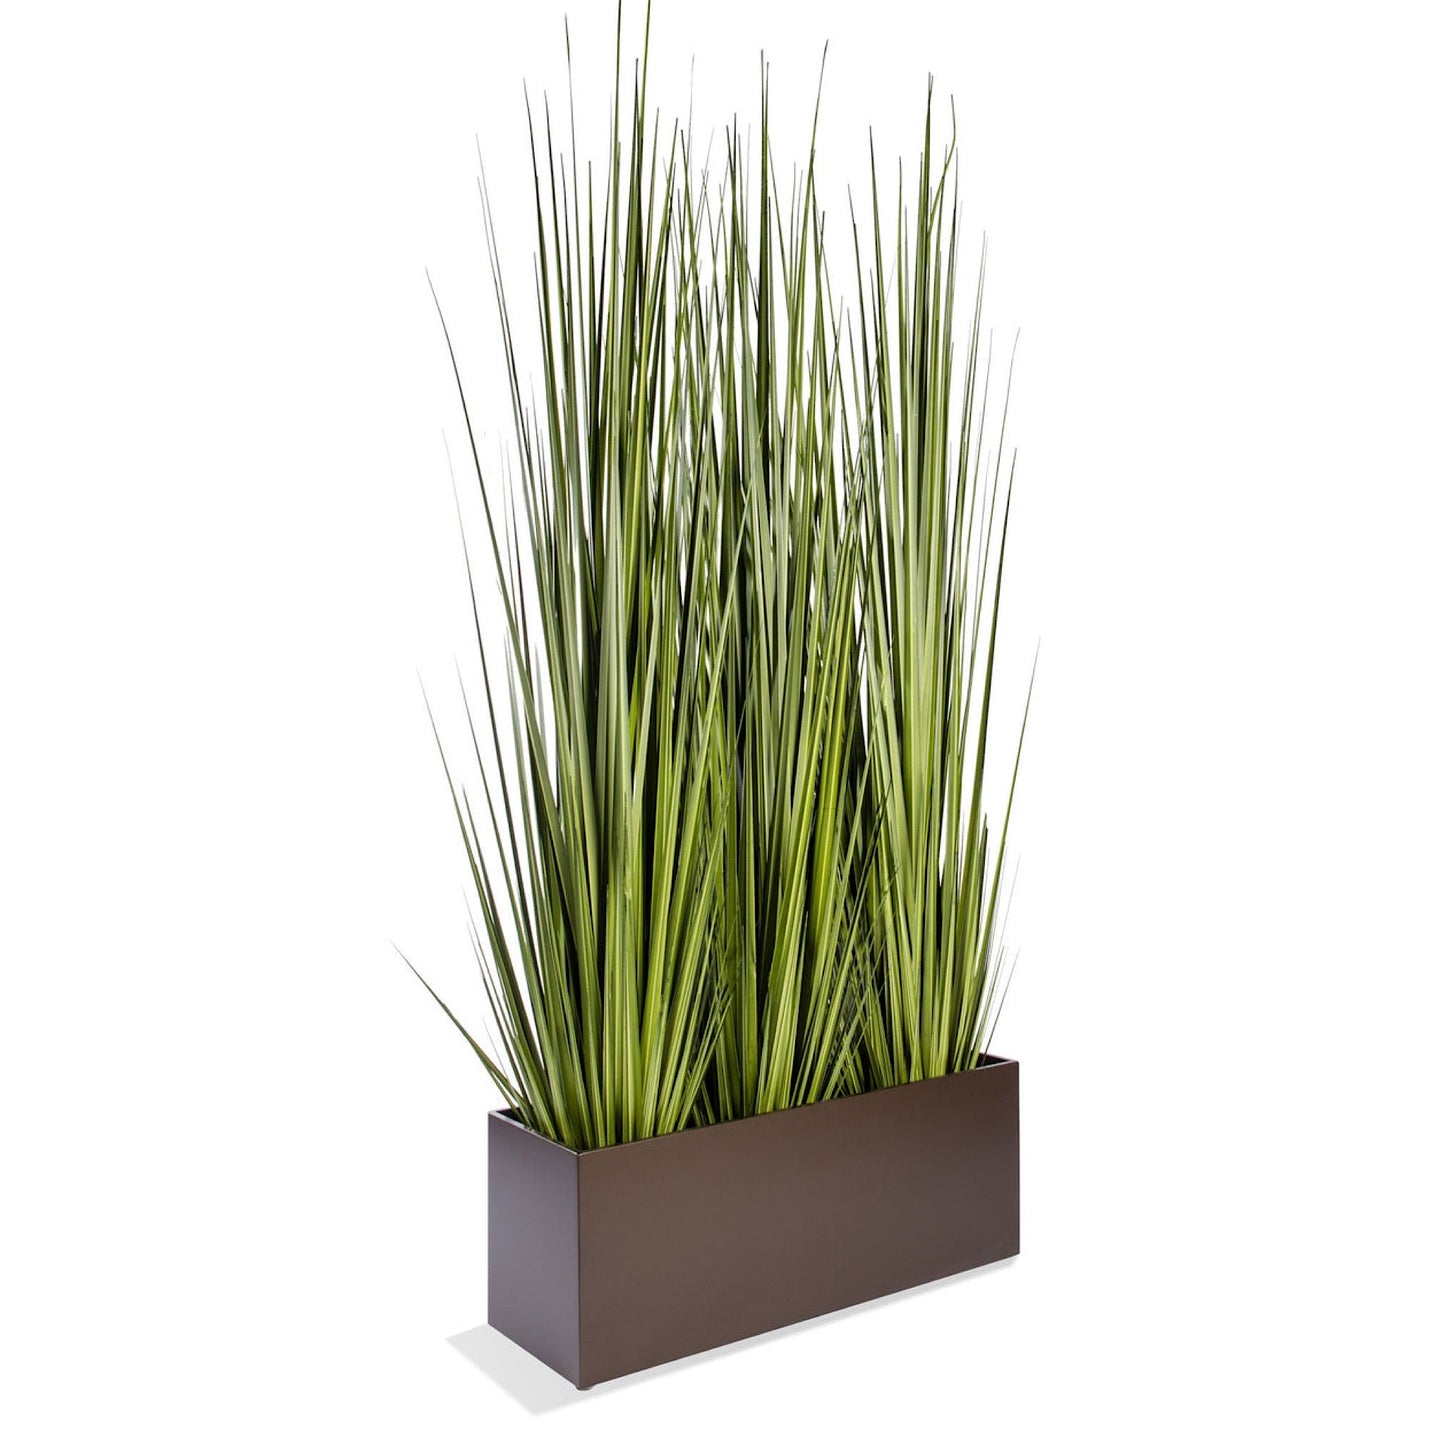 GRASS: CENTURY 86"H, POTTED